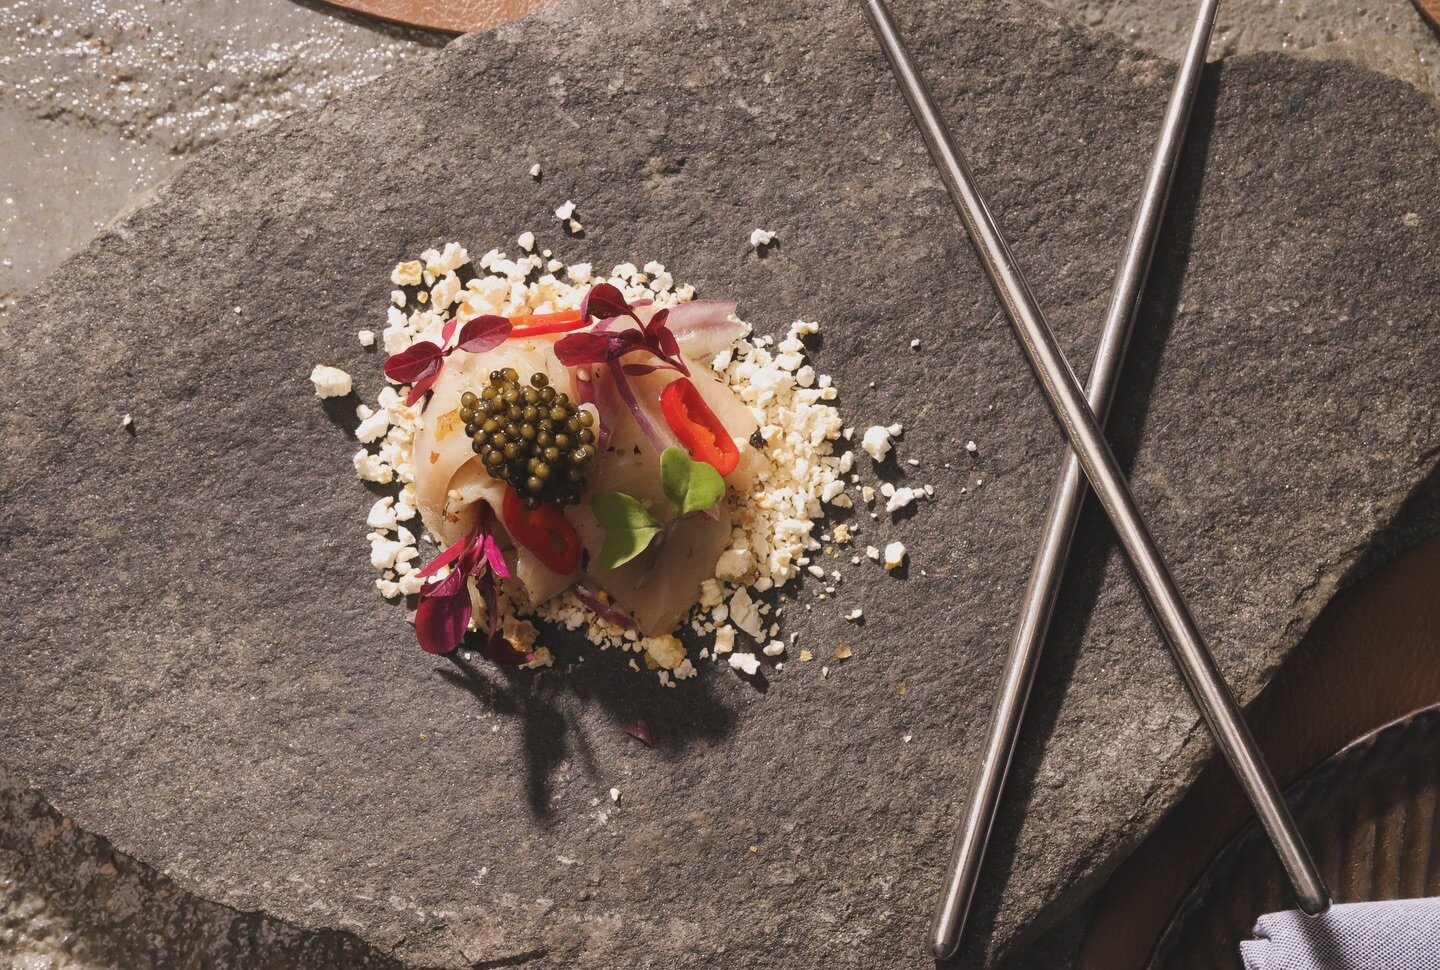 Popcorn Hamachi::::

Growing up on 150 acres of organic farmland, sourcing enough protein for a sustainable vegan diet was a cornerstone of life for Chef Domingo and his family. Popcorn was a much anticipated Friday night &lsquo;treat&rsquo; amongst 